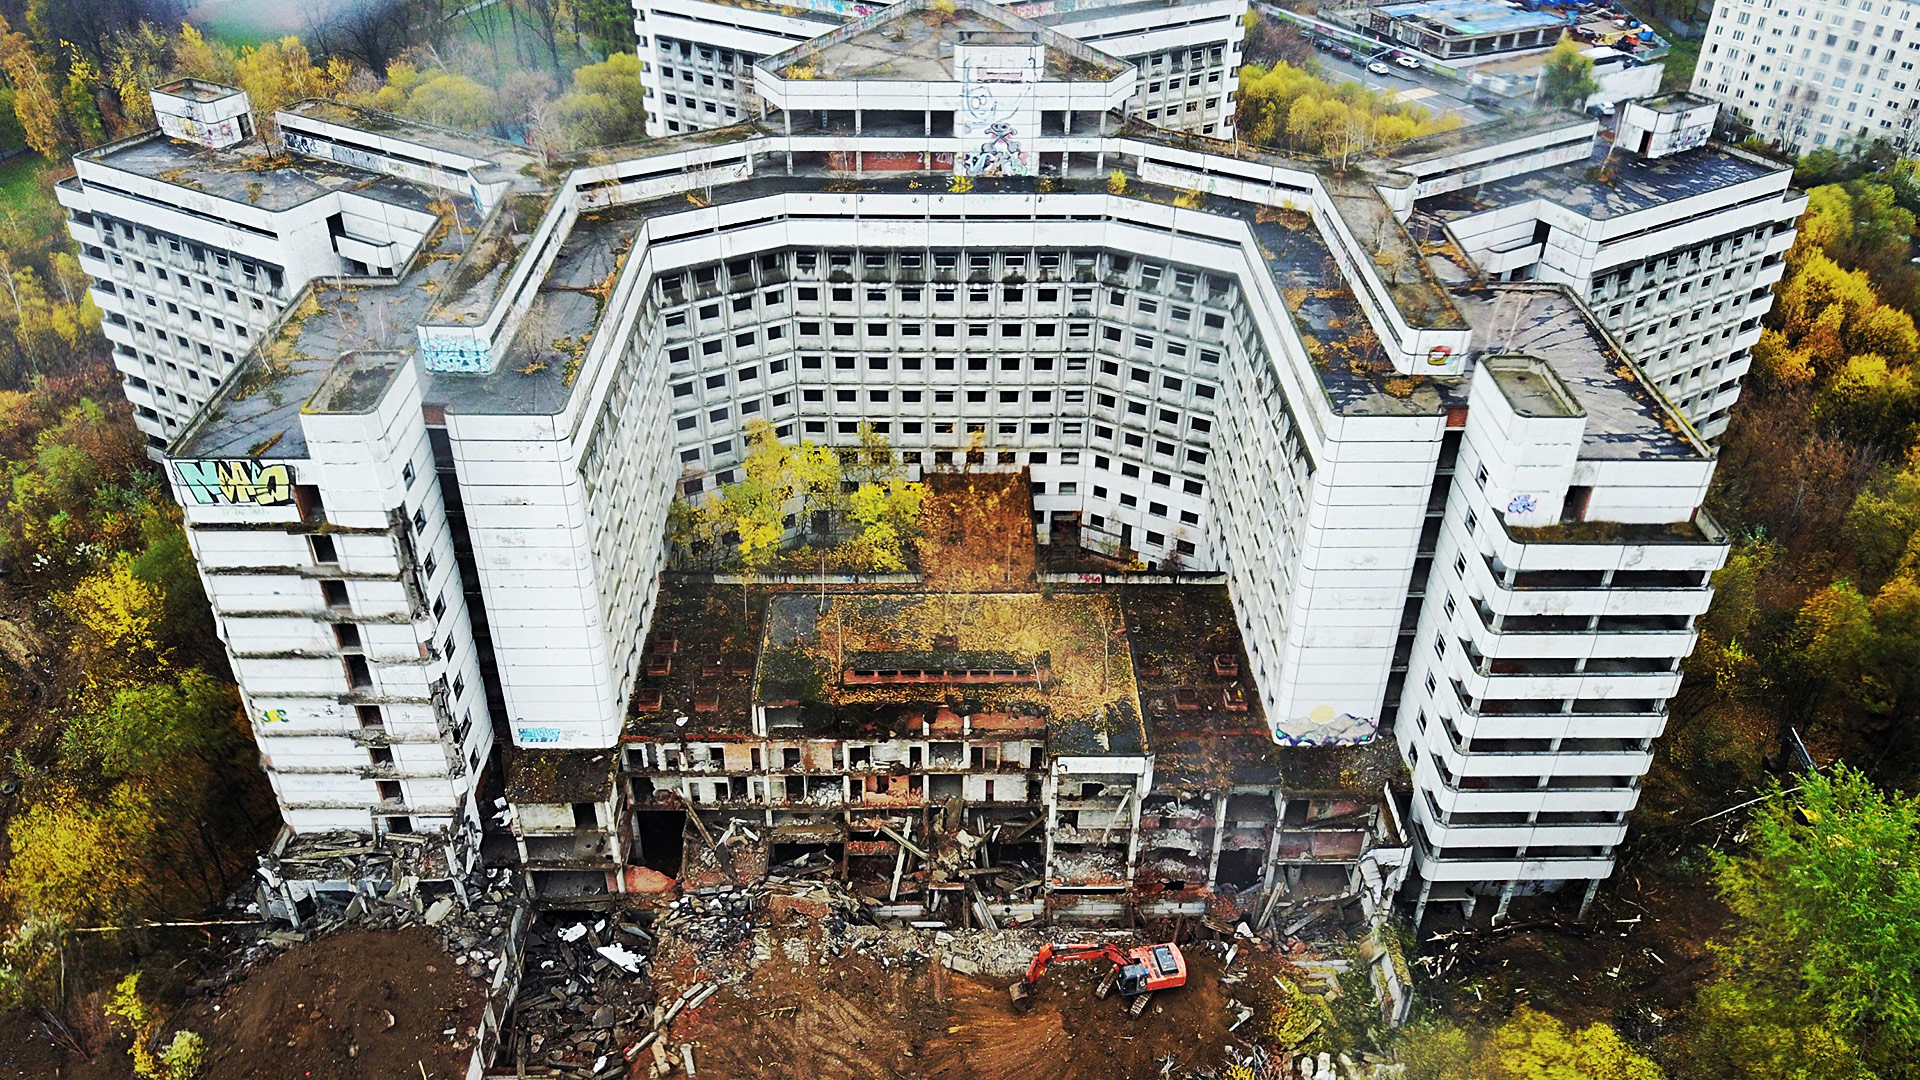 Moscow S Creepiest Abandoned Hospital In Photos Russia Beyond